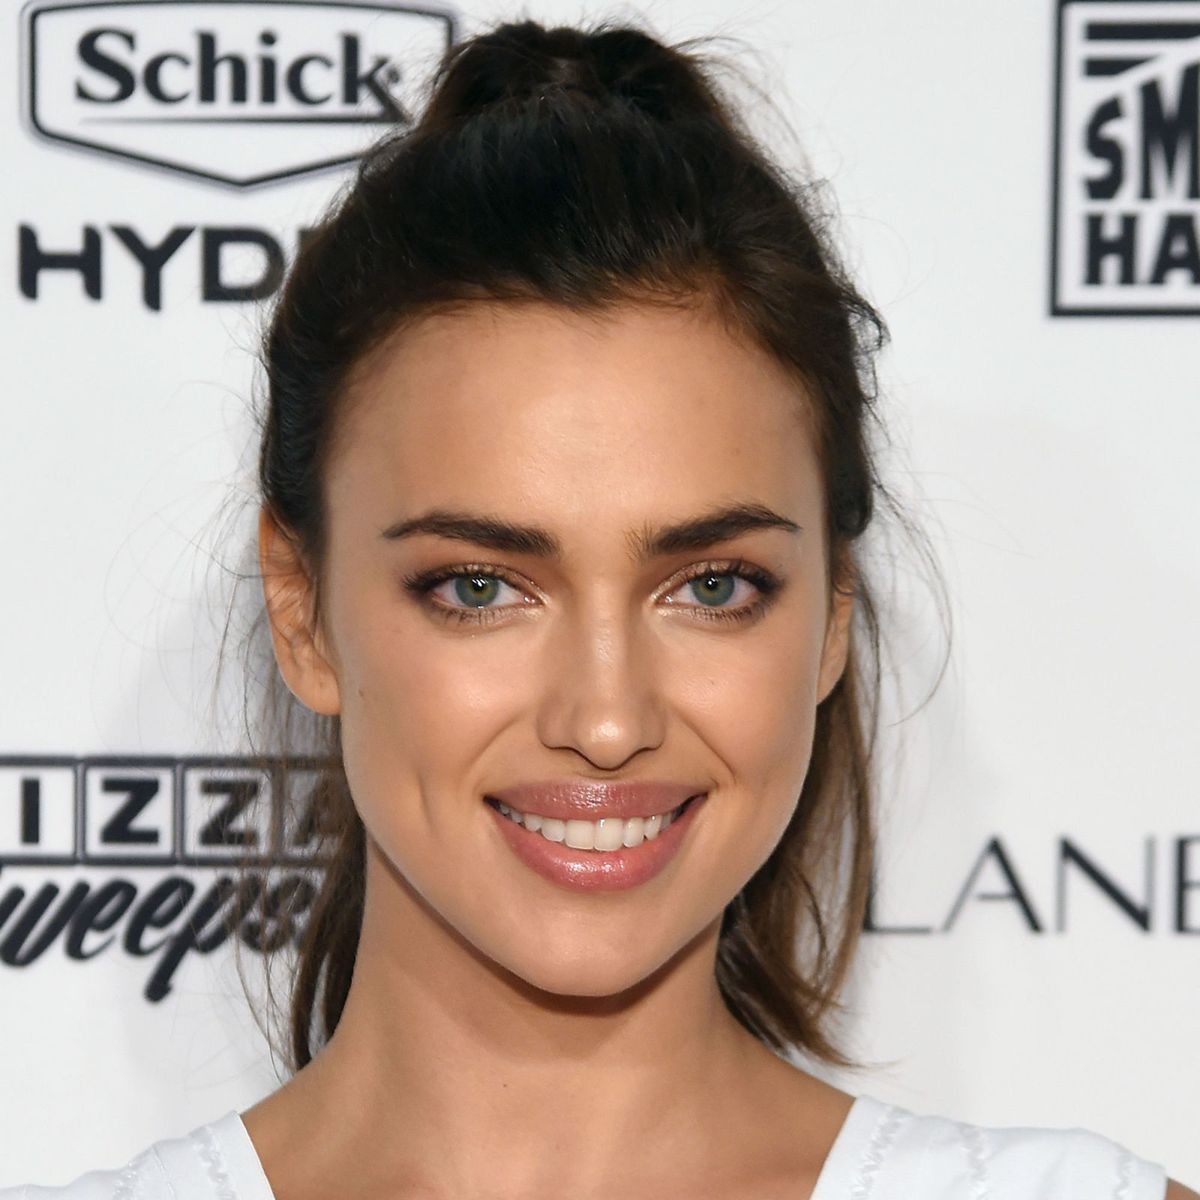 Irina Shayk bares her hips in a corset and low-rise jeans